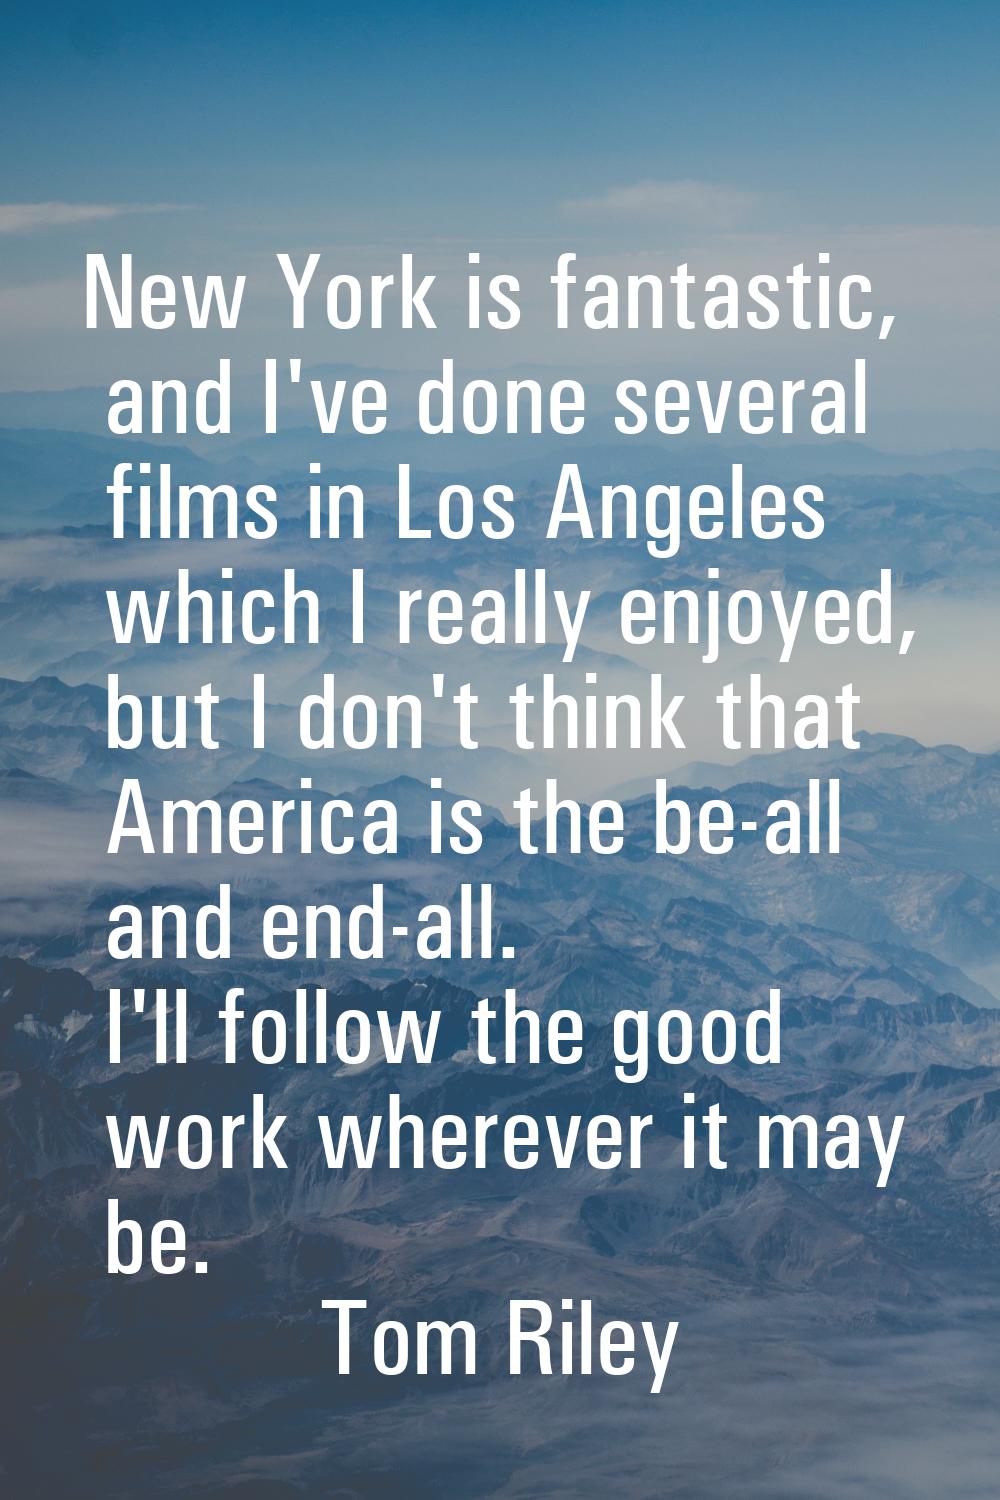 New York is fantastic, and I've done several films in Los Angeles which I really enjoyed, but I don